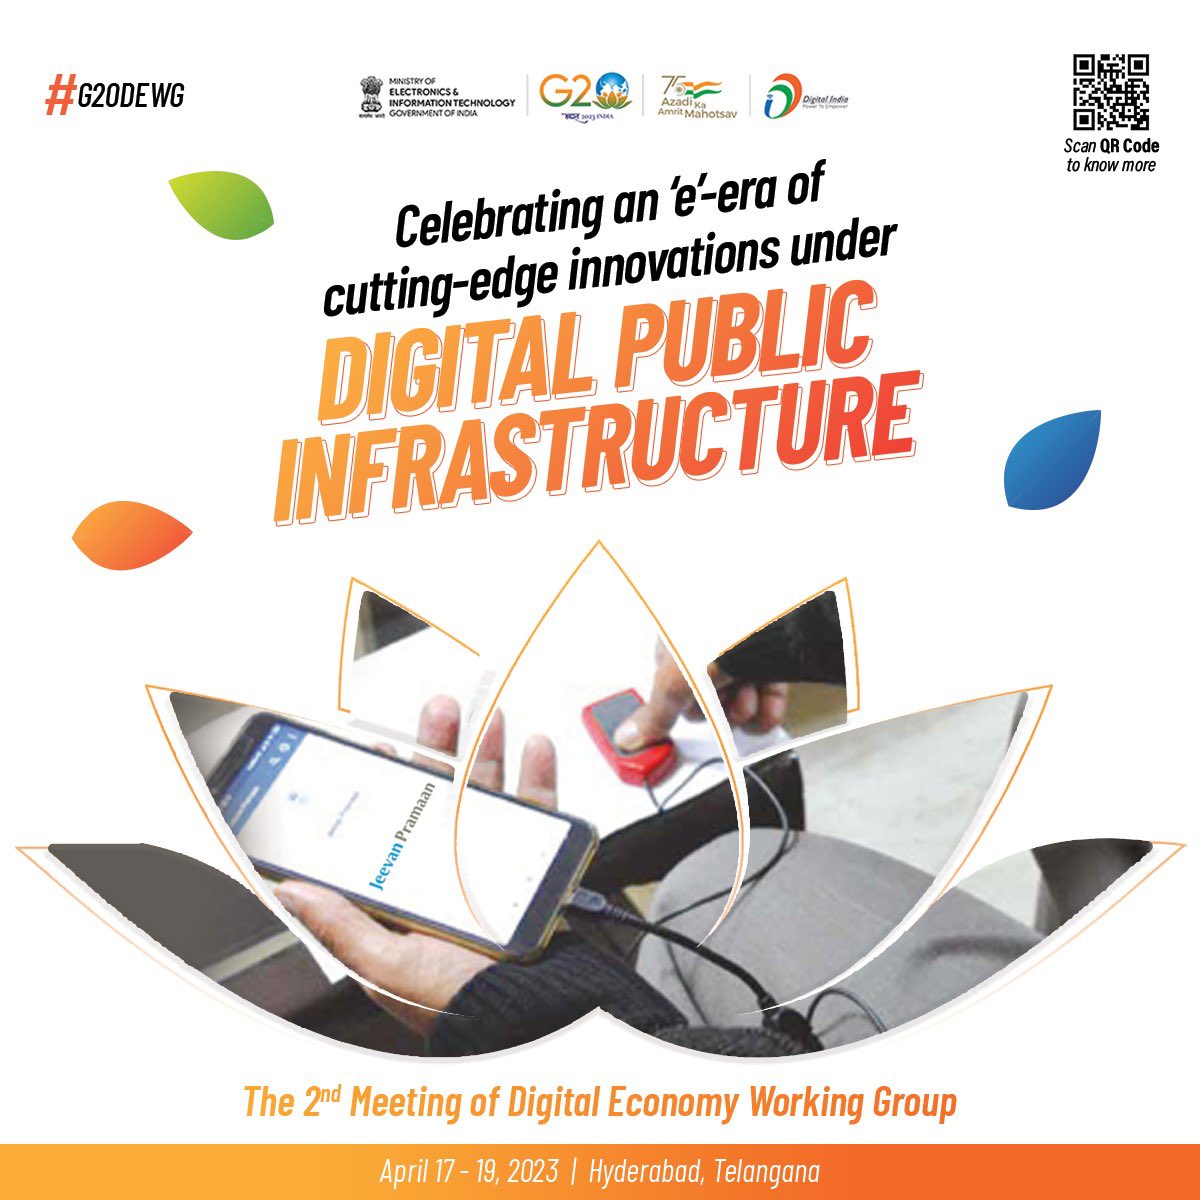 With digital public infrastructure, accessing public services has never been easier. The 2nd Meeting of #G20DEWG, taking place in Hyderabad from April 17-19, 2023, will throw light on many such initiatives. #G20India #DigitalPublicGoods #Innovation #JeevanPramaan